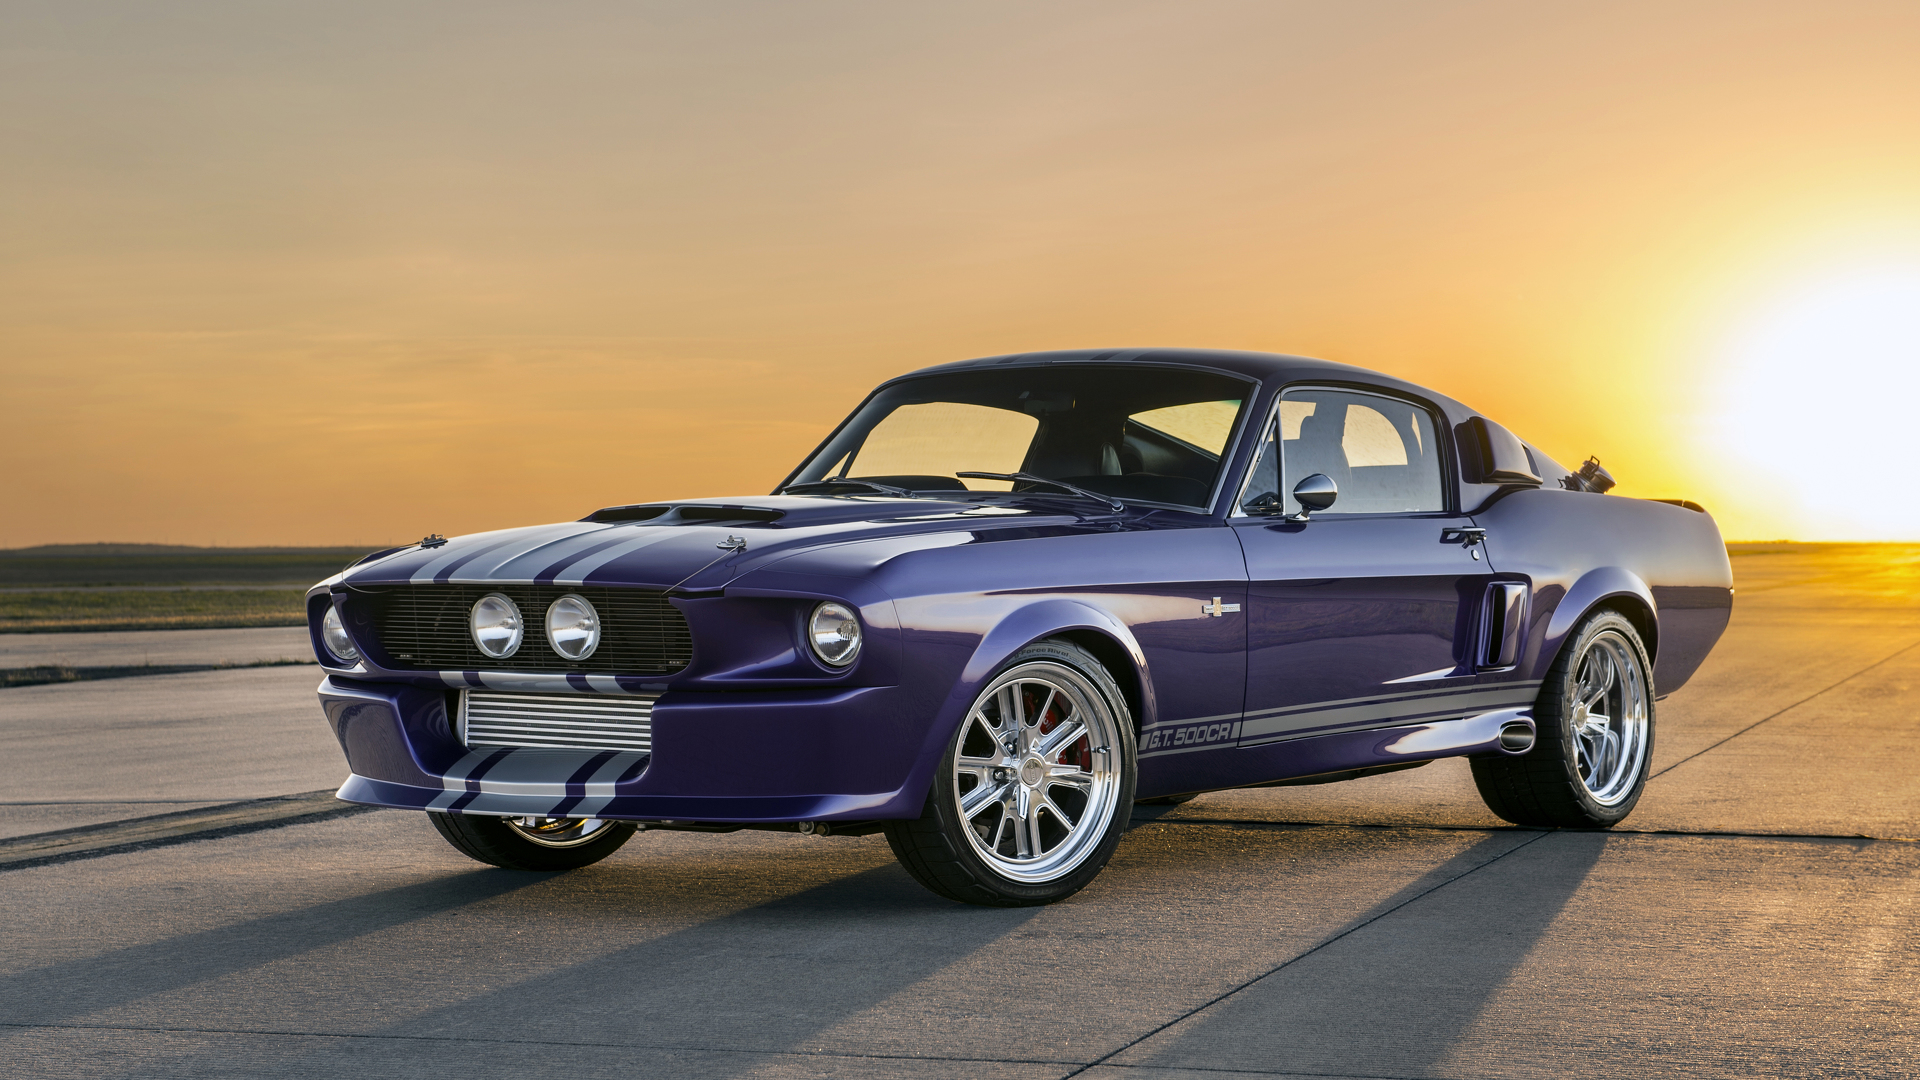 vehicles, shelby gt500 classic recreation, car, fastback, muscle car, purple car, ford